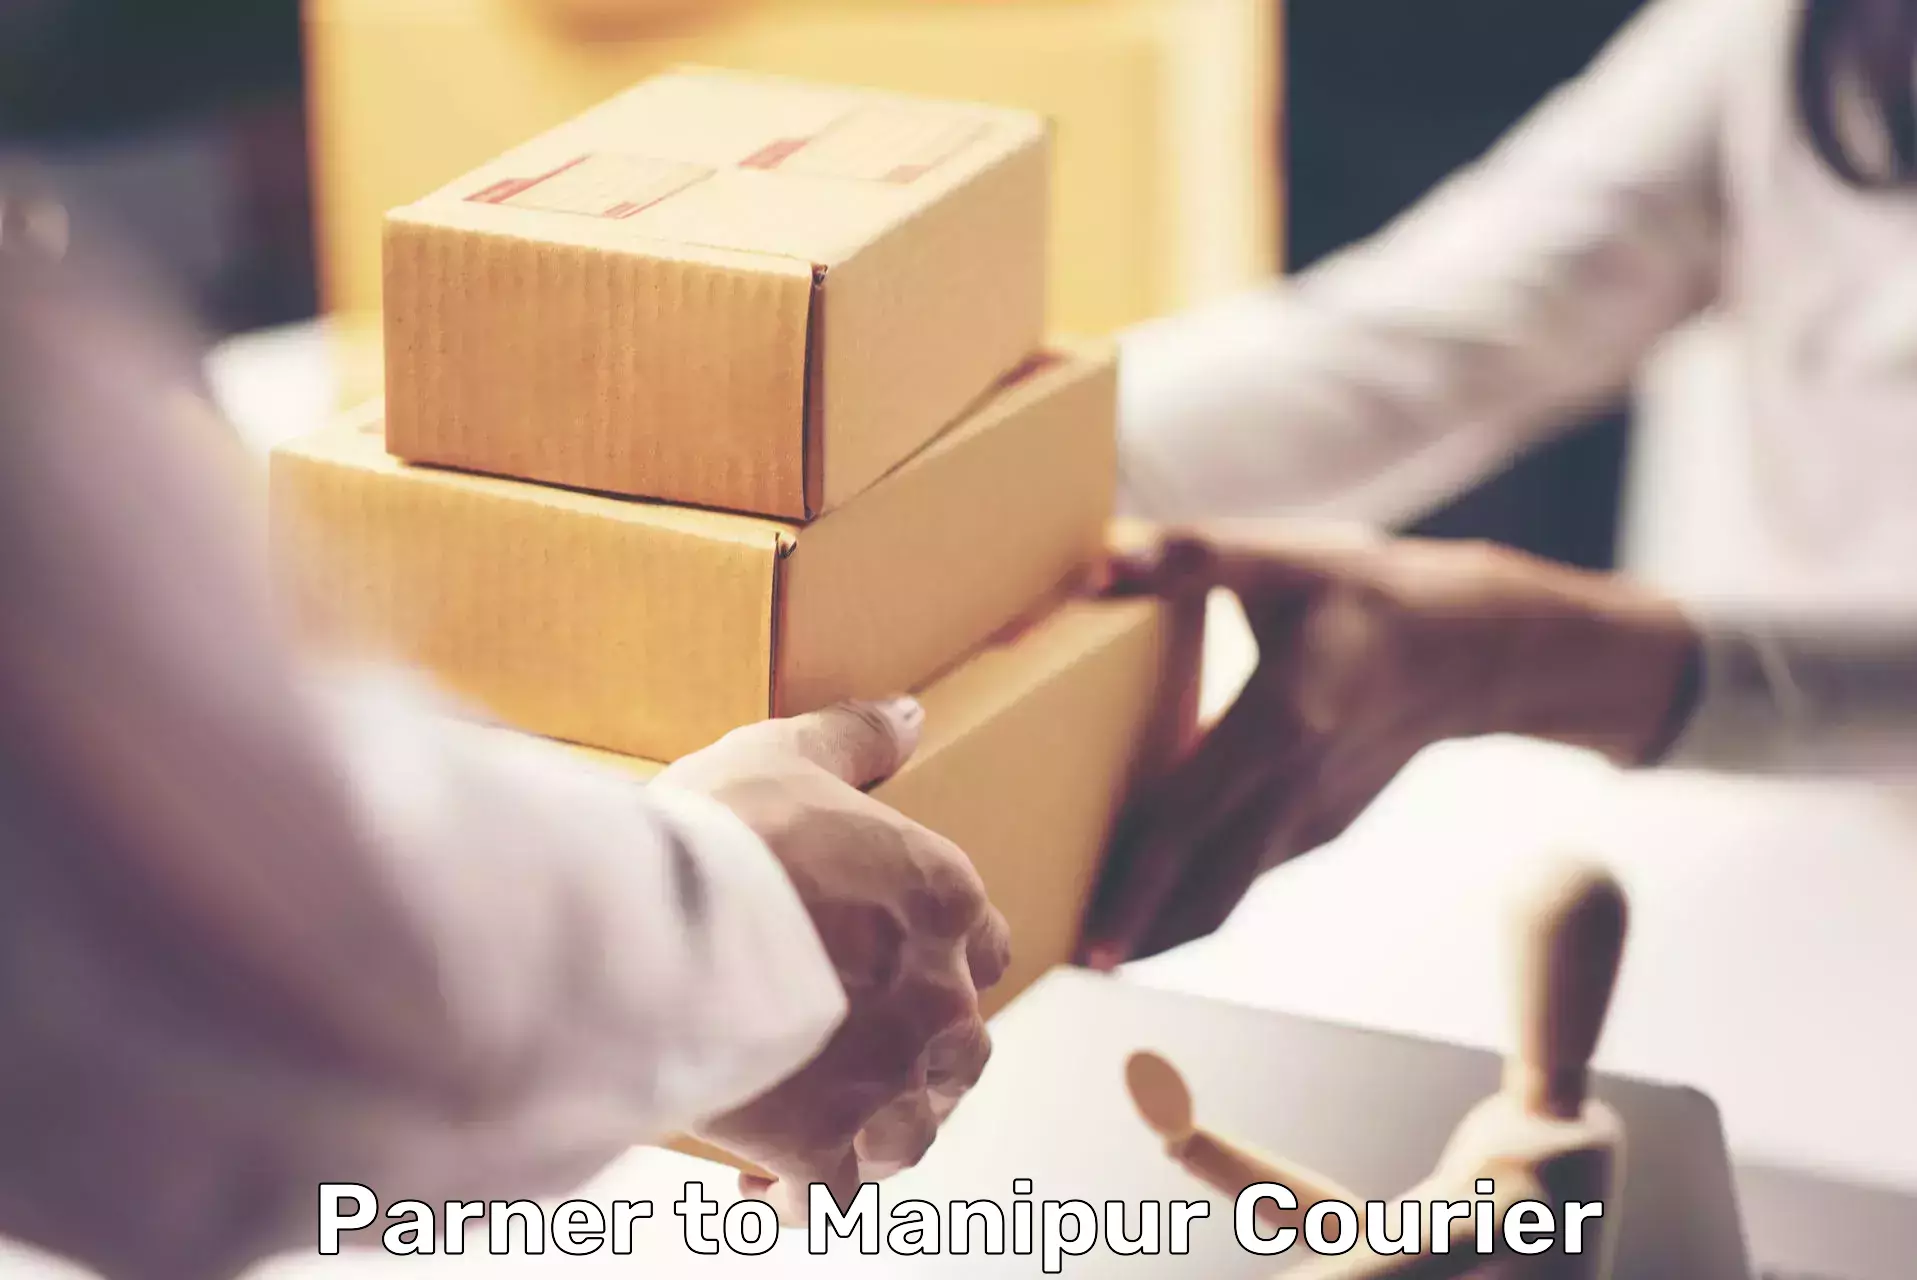 On-demand shipping options Parner to Manipur